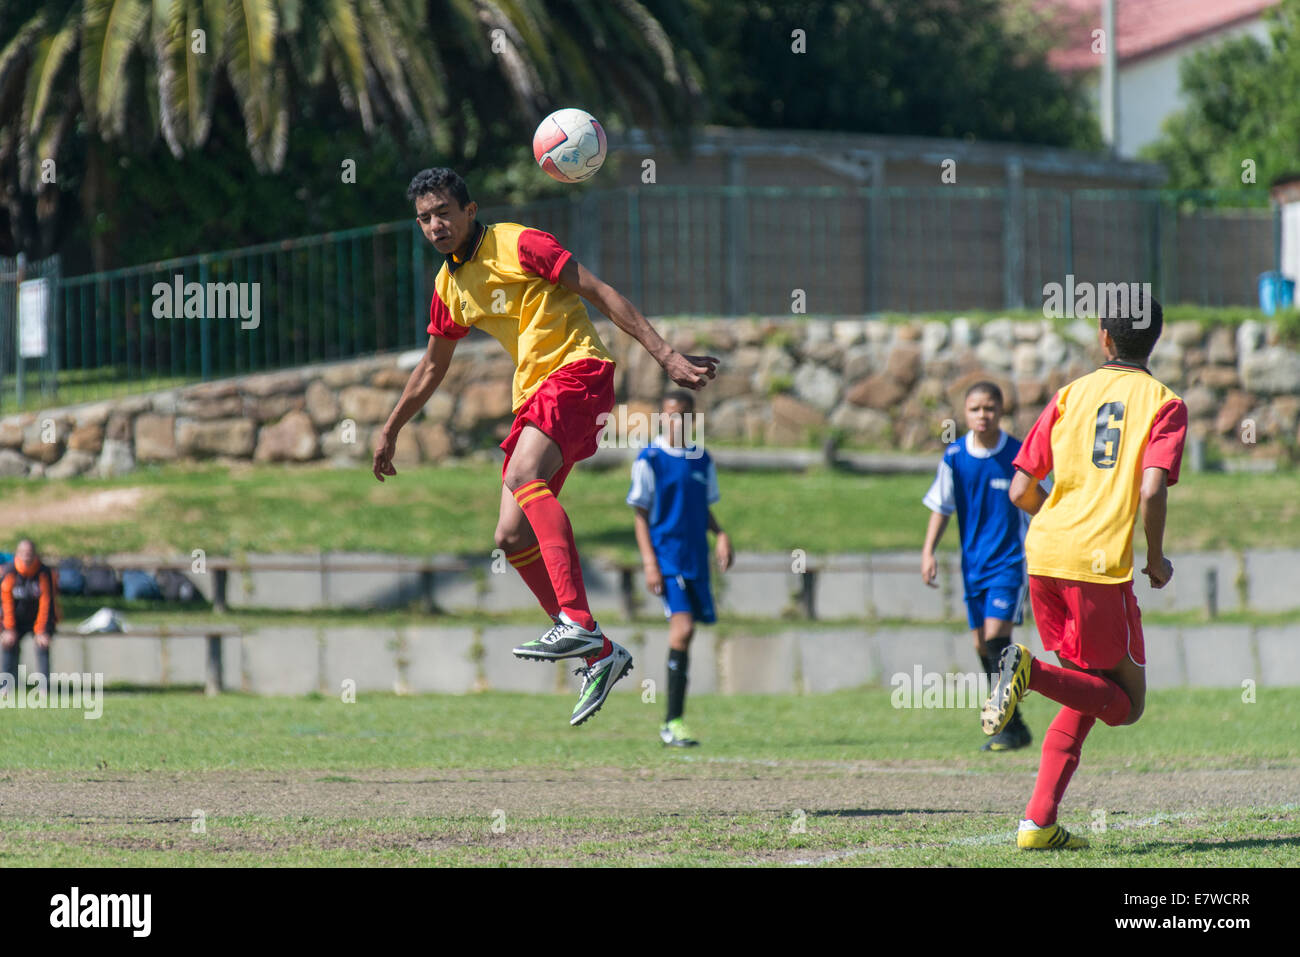 Young football players jumping to head the ball, Cape Town, South Africa Stock Photo